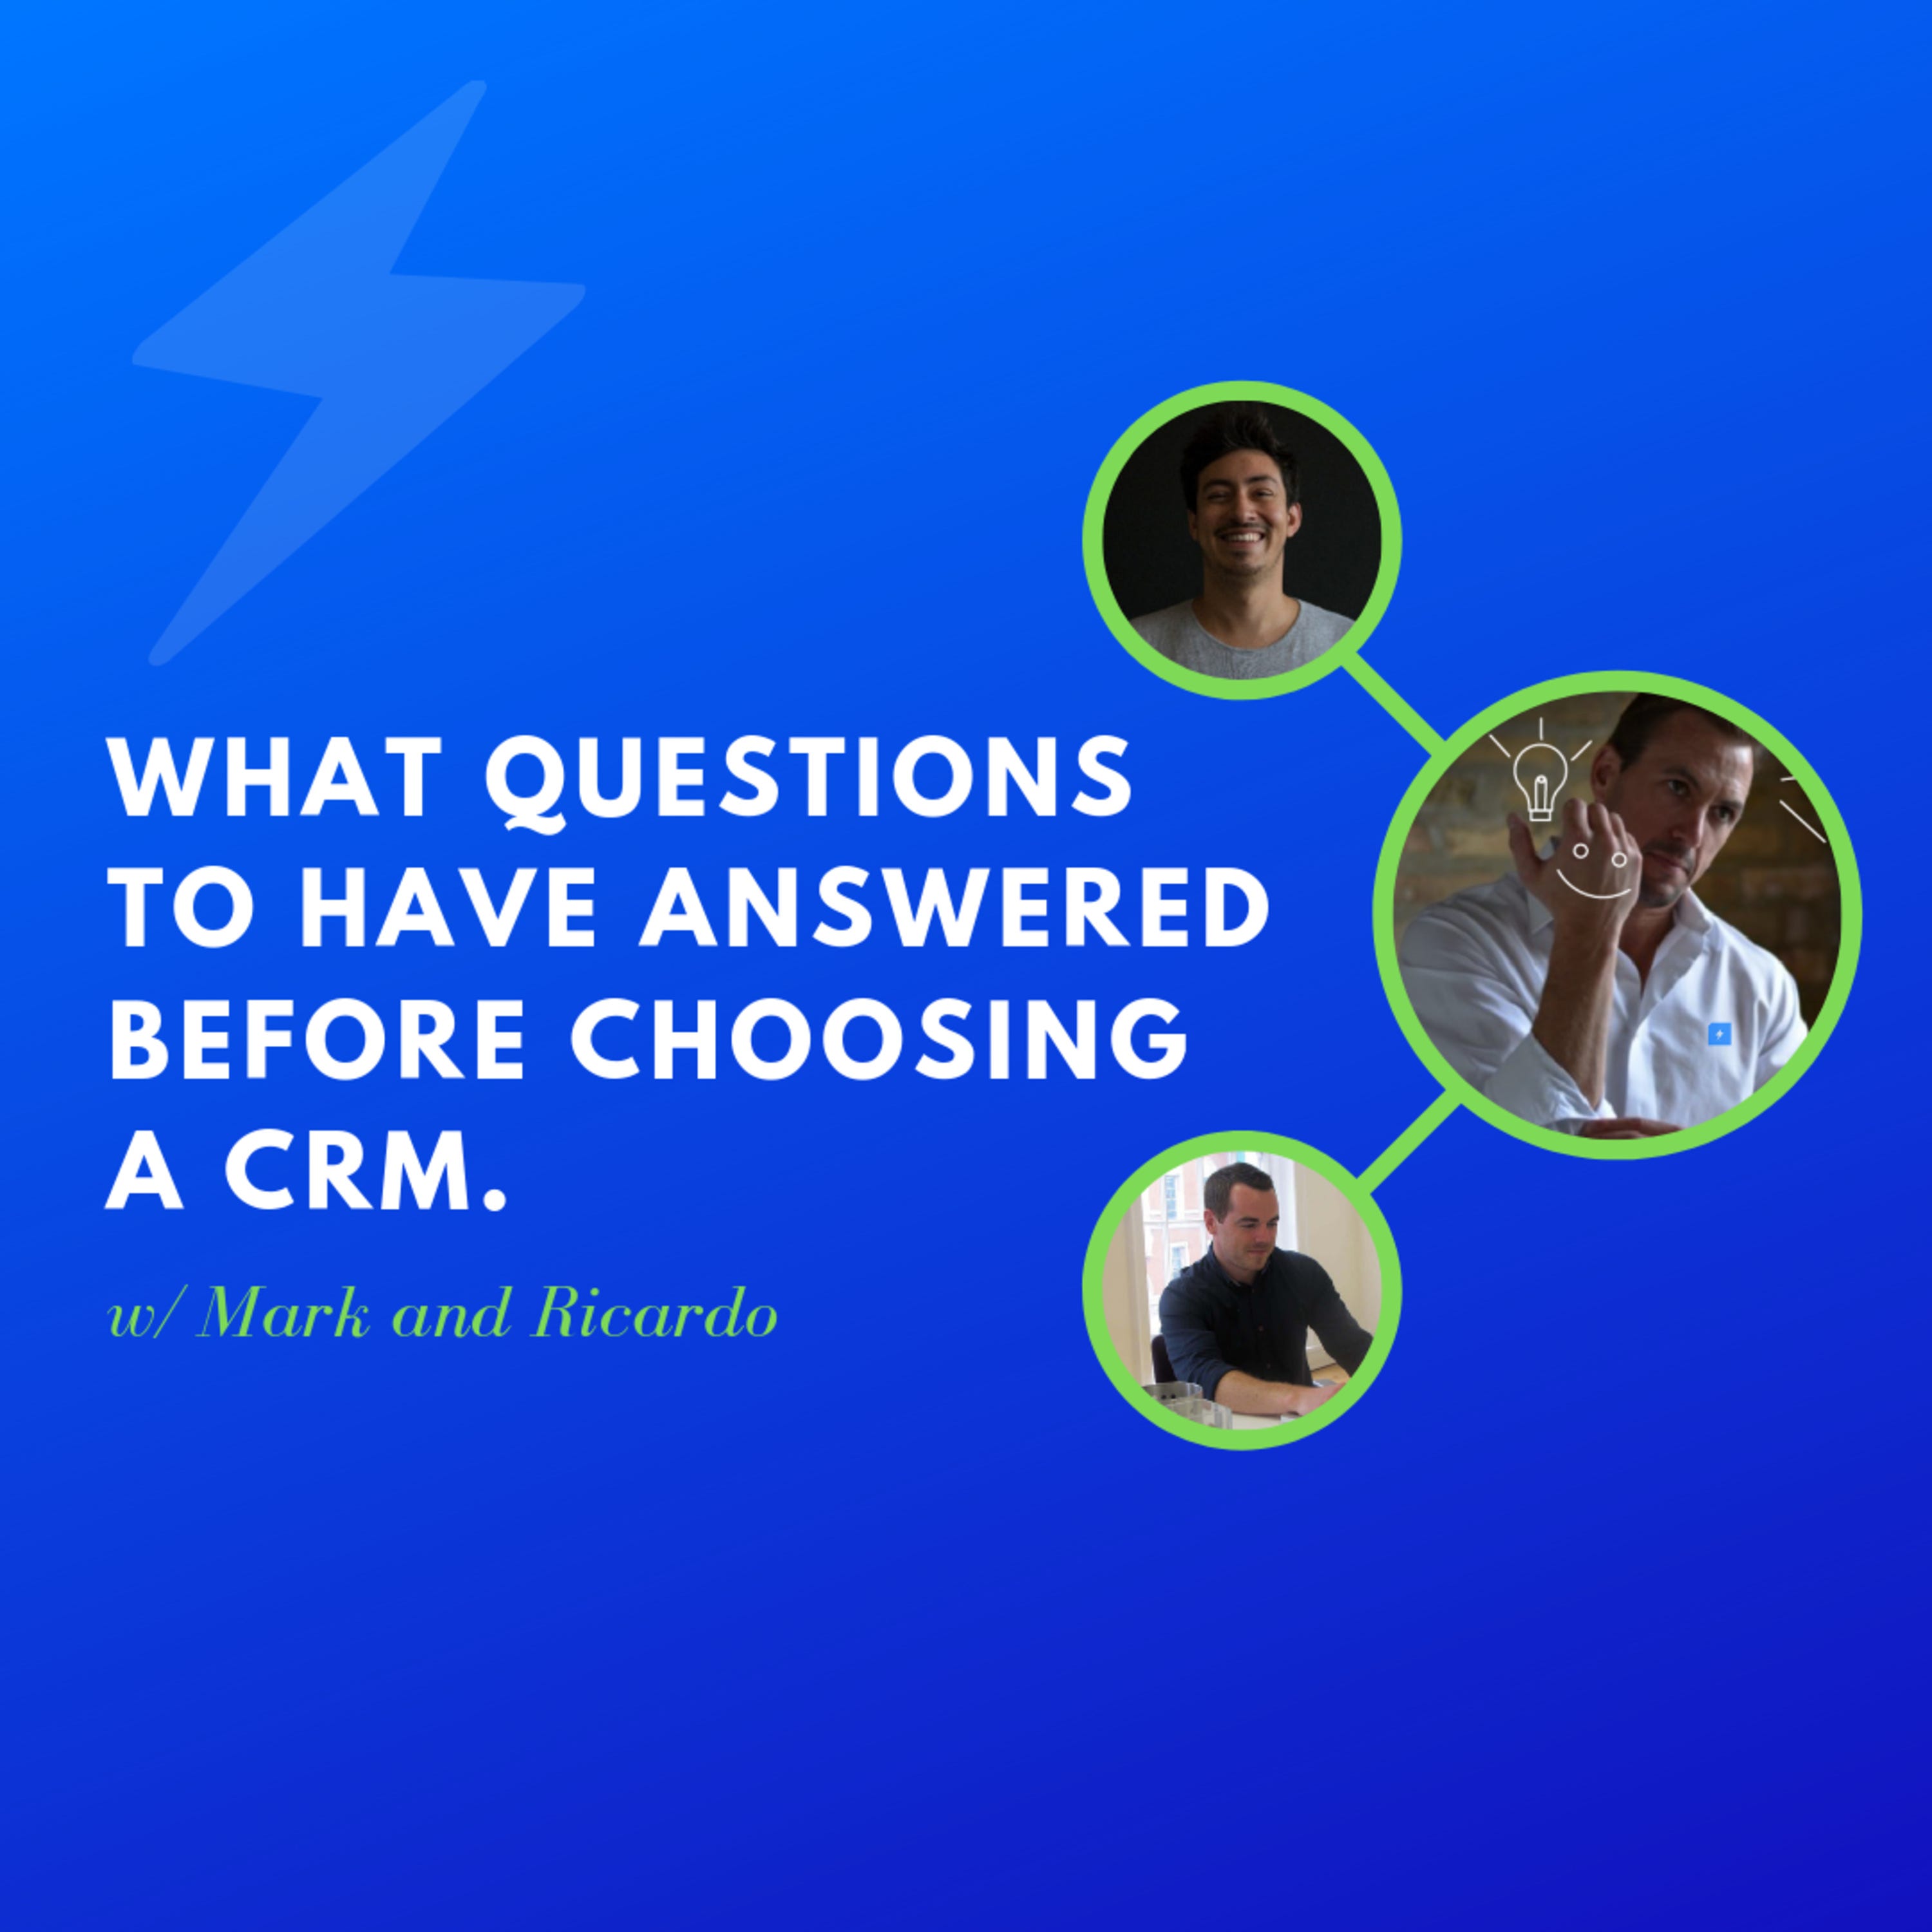 5 Questions To Answer Before Choosing A CRM - Mastermind Discussion | Alex Glenn